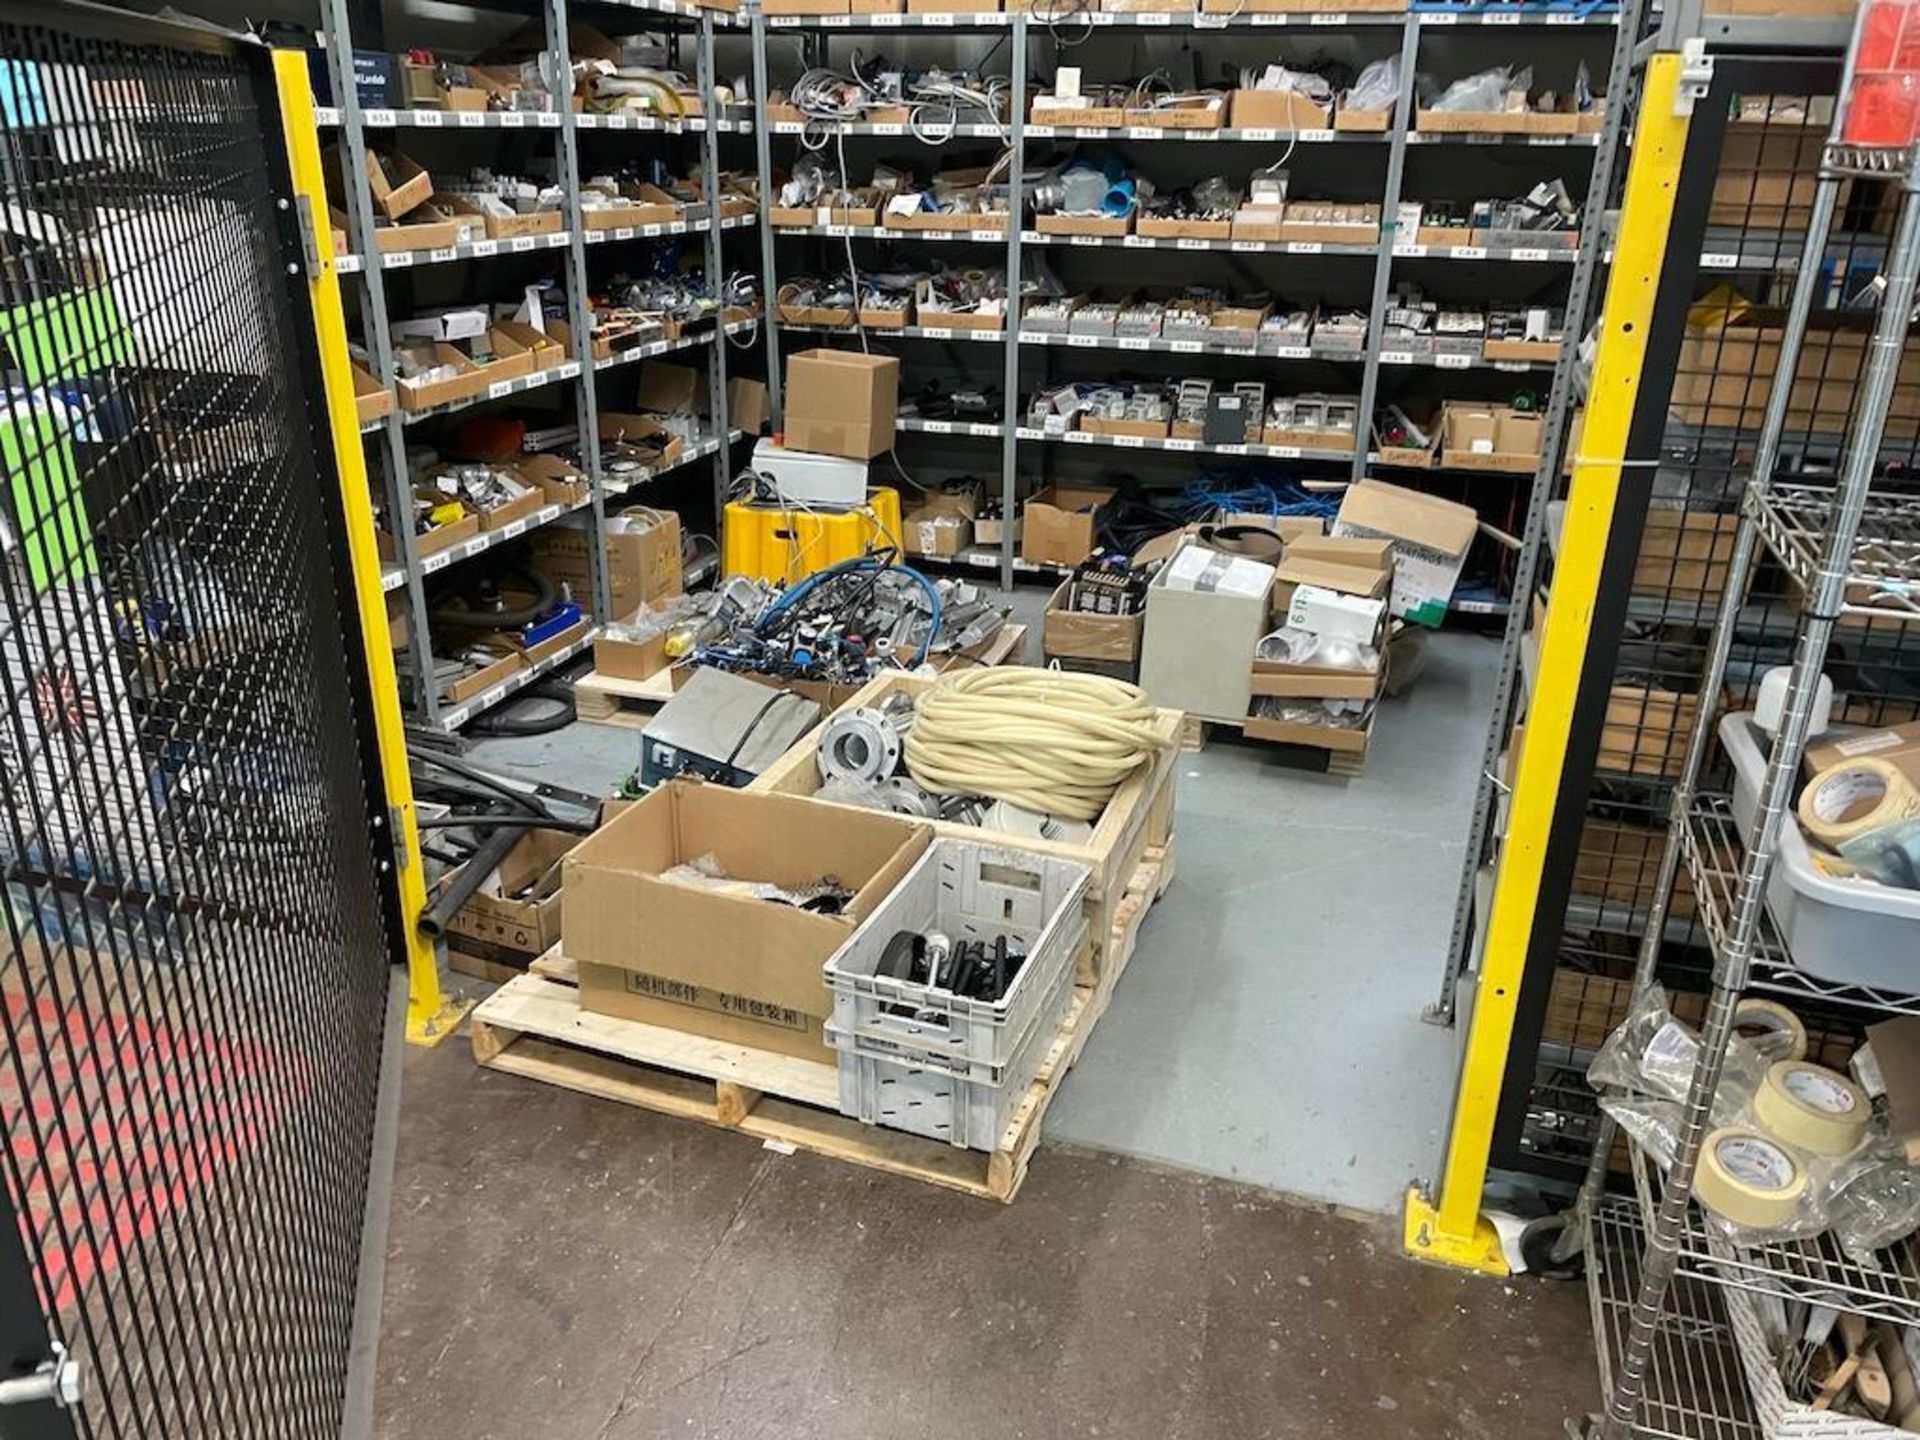 LOT CONTENTS (2) MAINTENANCE AND SUPPLY ROOMS INCLUDING: (9) METAL RACKS W ELECTRICAL COMPONENT AND - Image 17 of 18